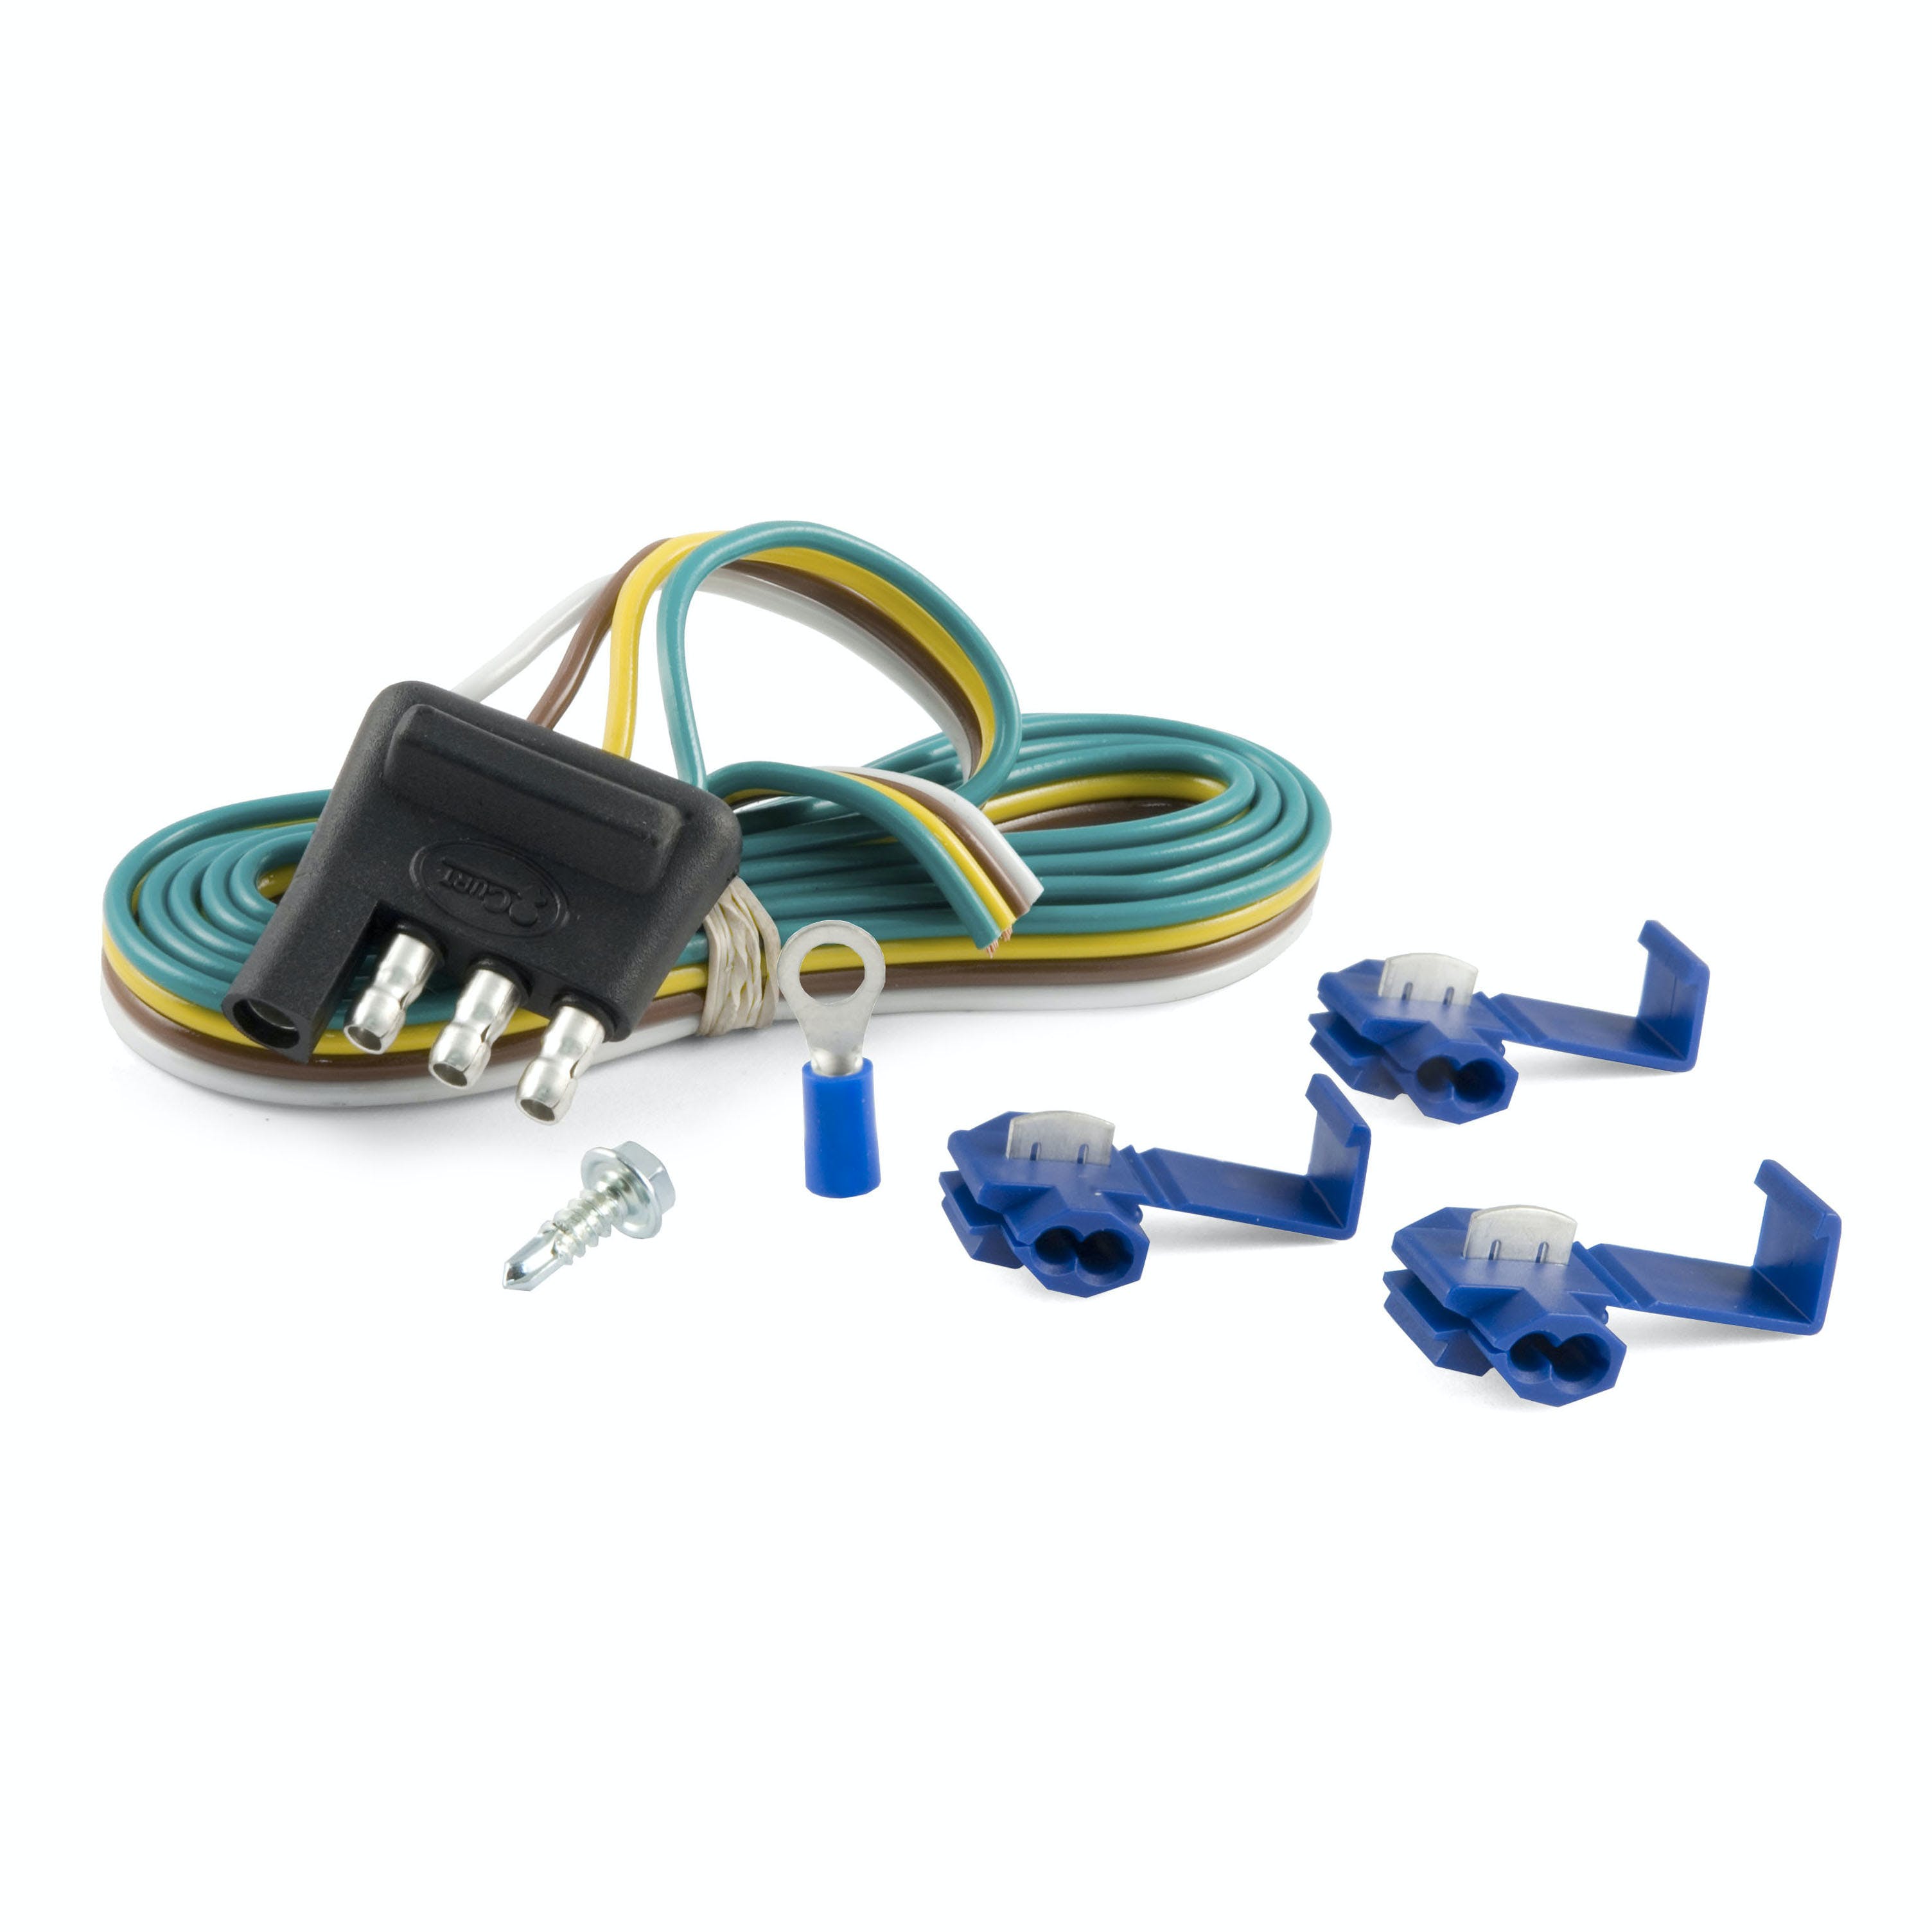 CURT 58349 4-Way Flat Connector Plug with 48 Wires and Hardware (Trailer Side, Packaged)